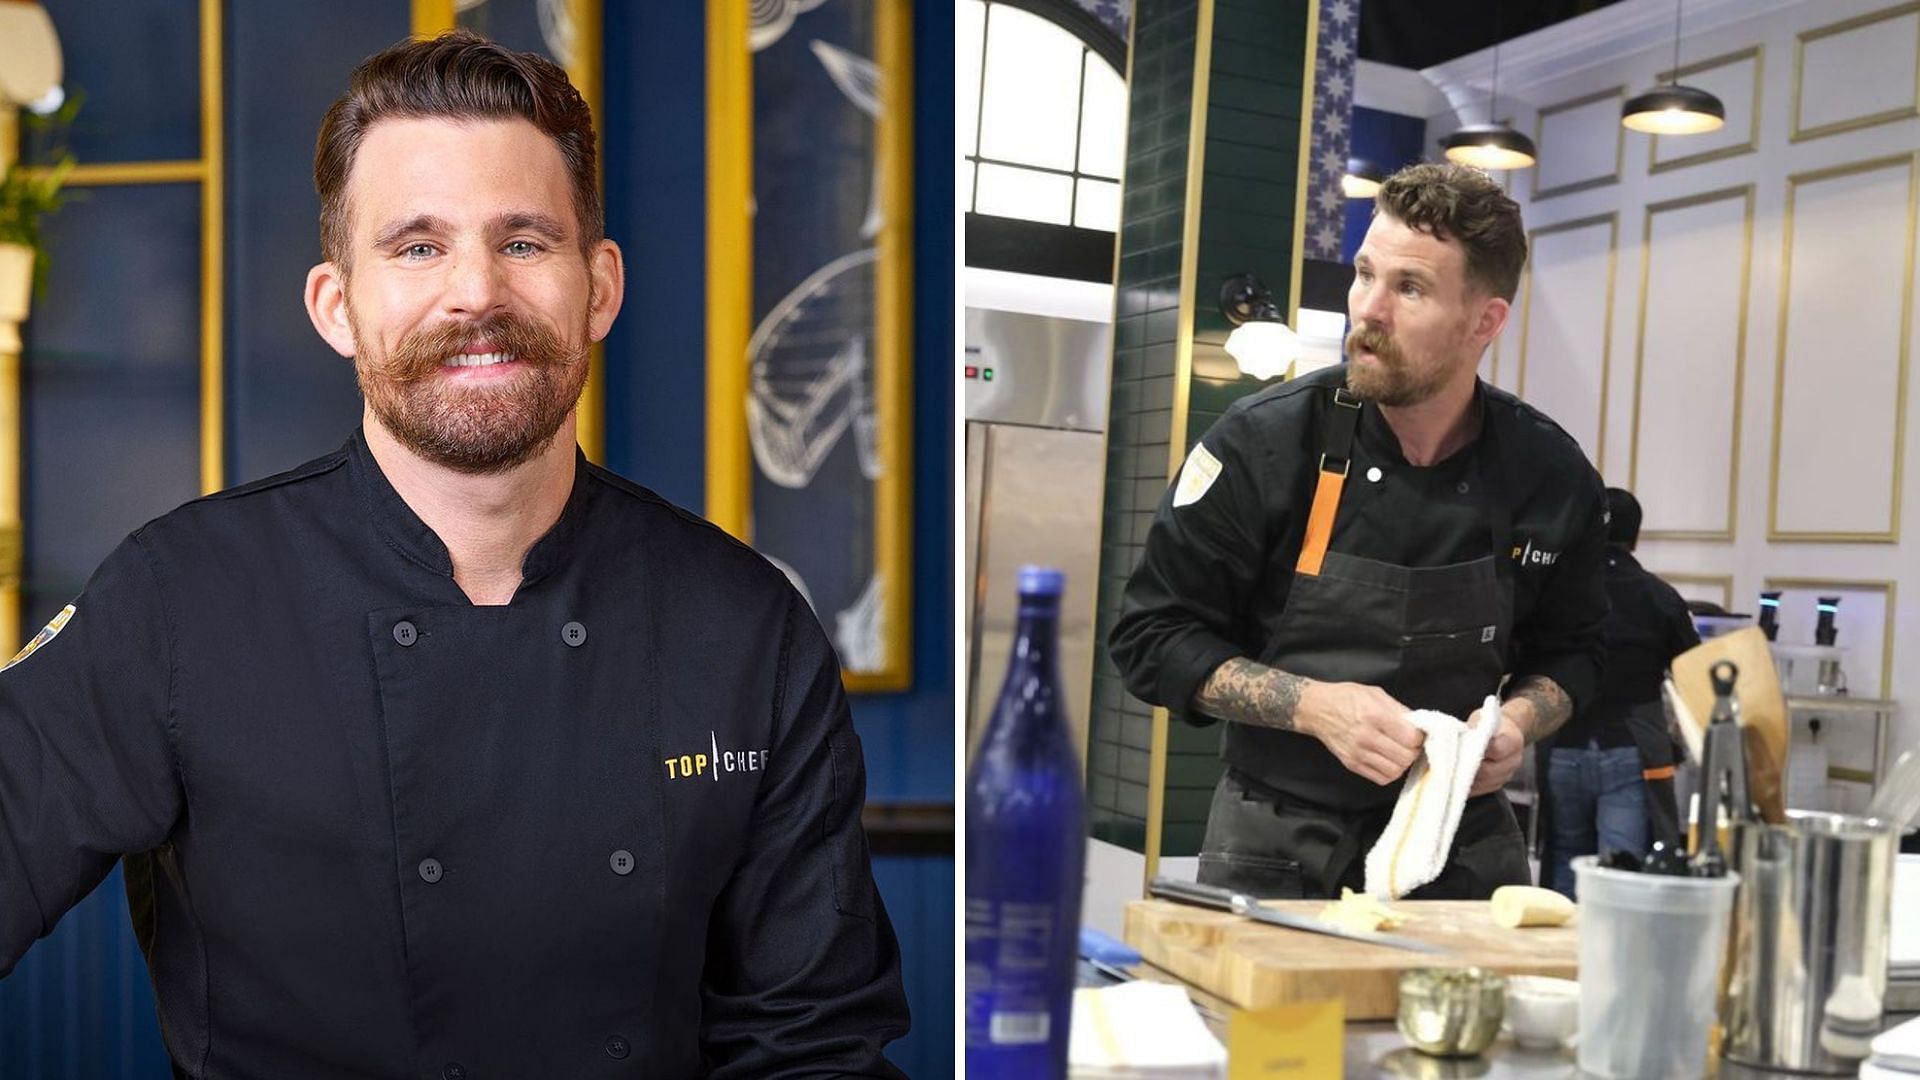 Dale MacKay was eliminated from Top Chef season 20